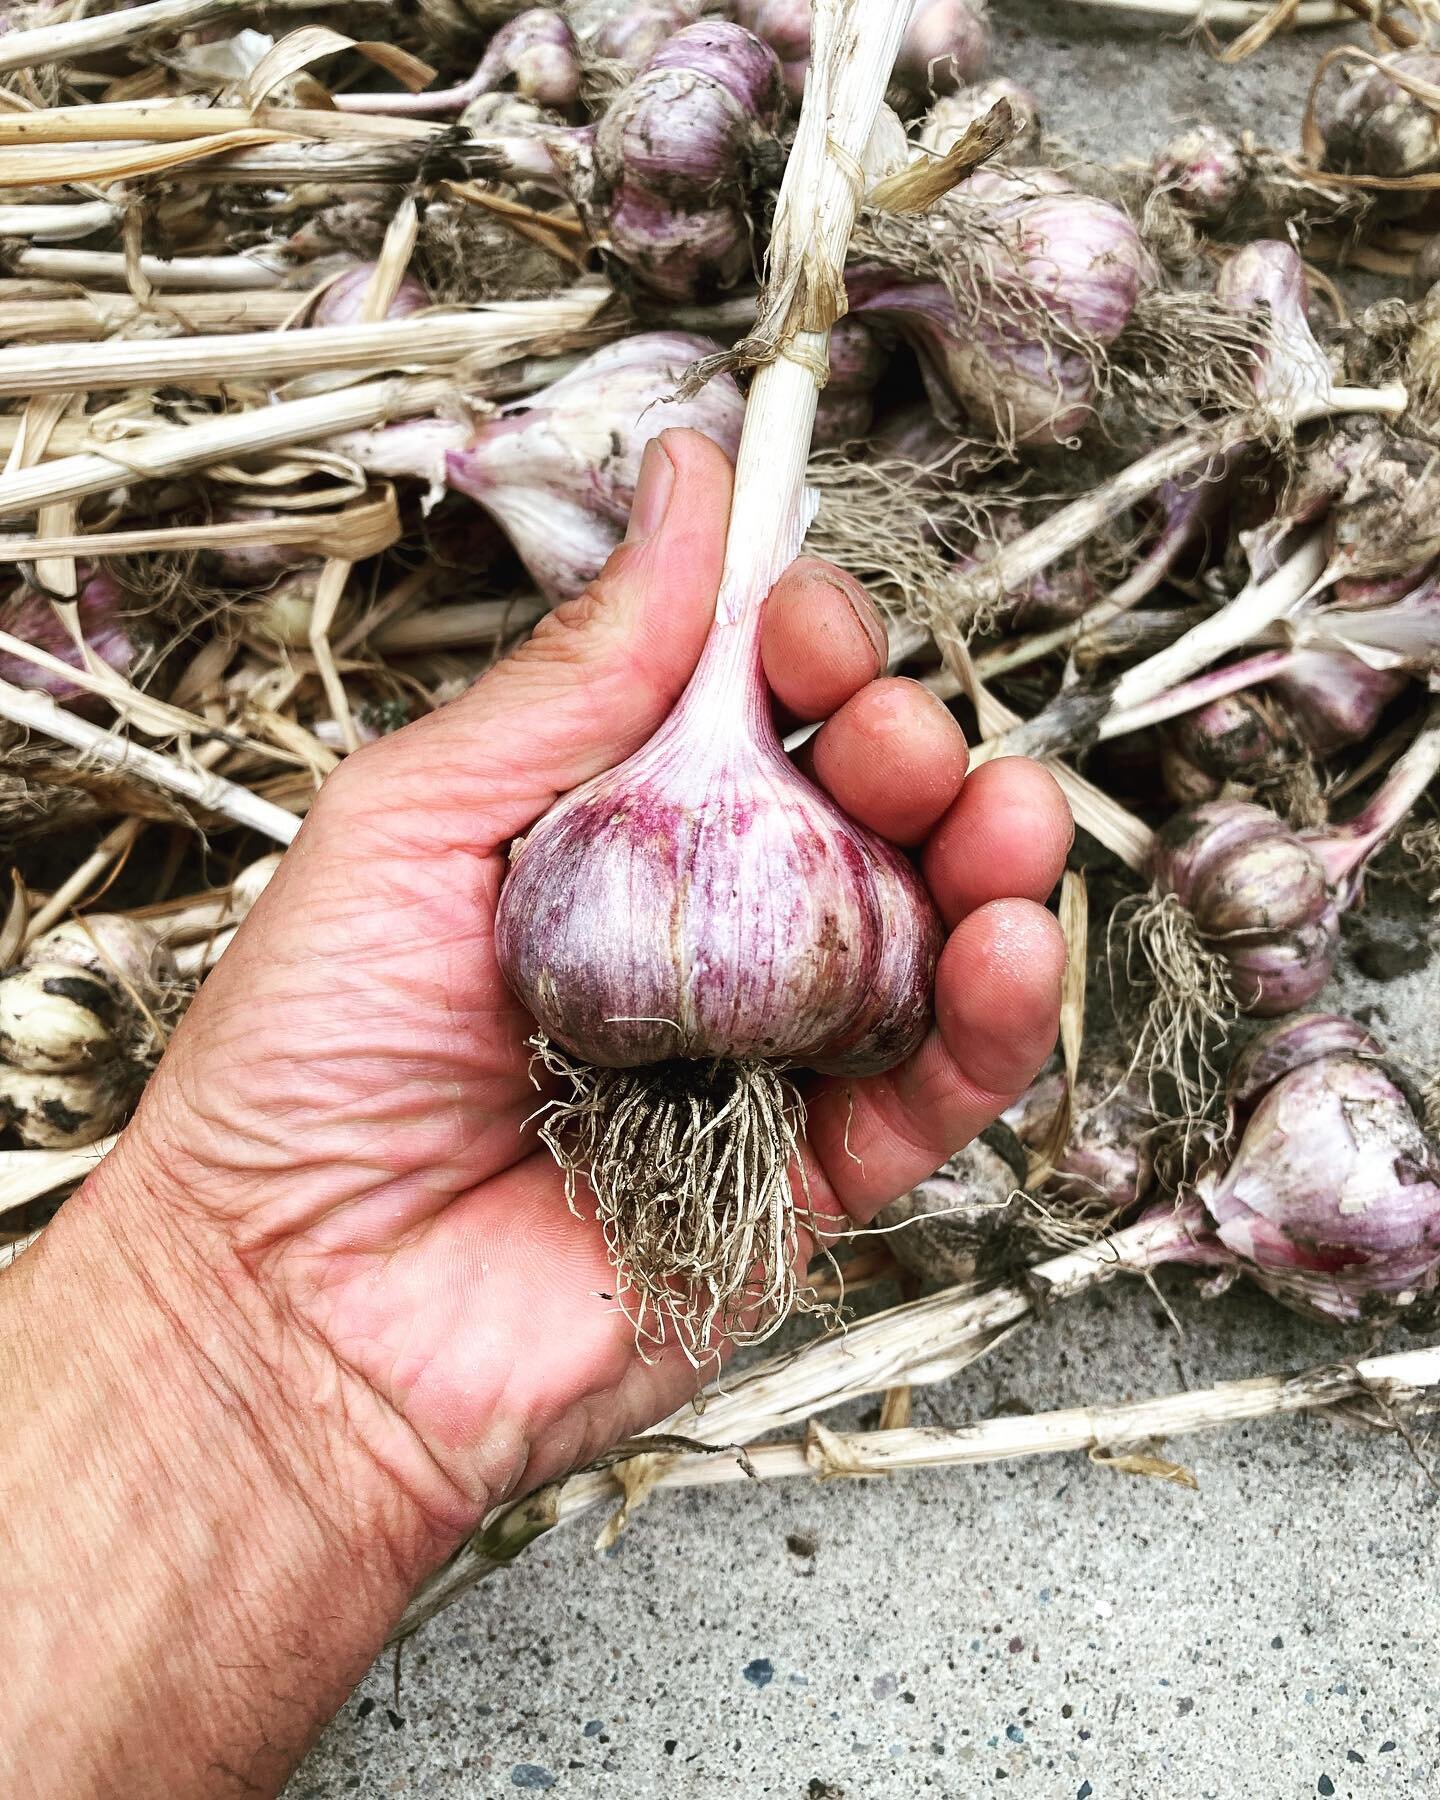 Favourite time of the year over here. No I don&rsquo;t have small hands, my garlic is beautiful! Summertime pizza is on a higher plane of deliciousness, especially since the cook is in his hot summertime mood 😎 #savinopizzeria #yycfood #yycliving #b